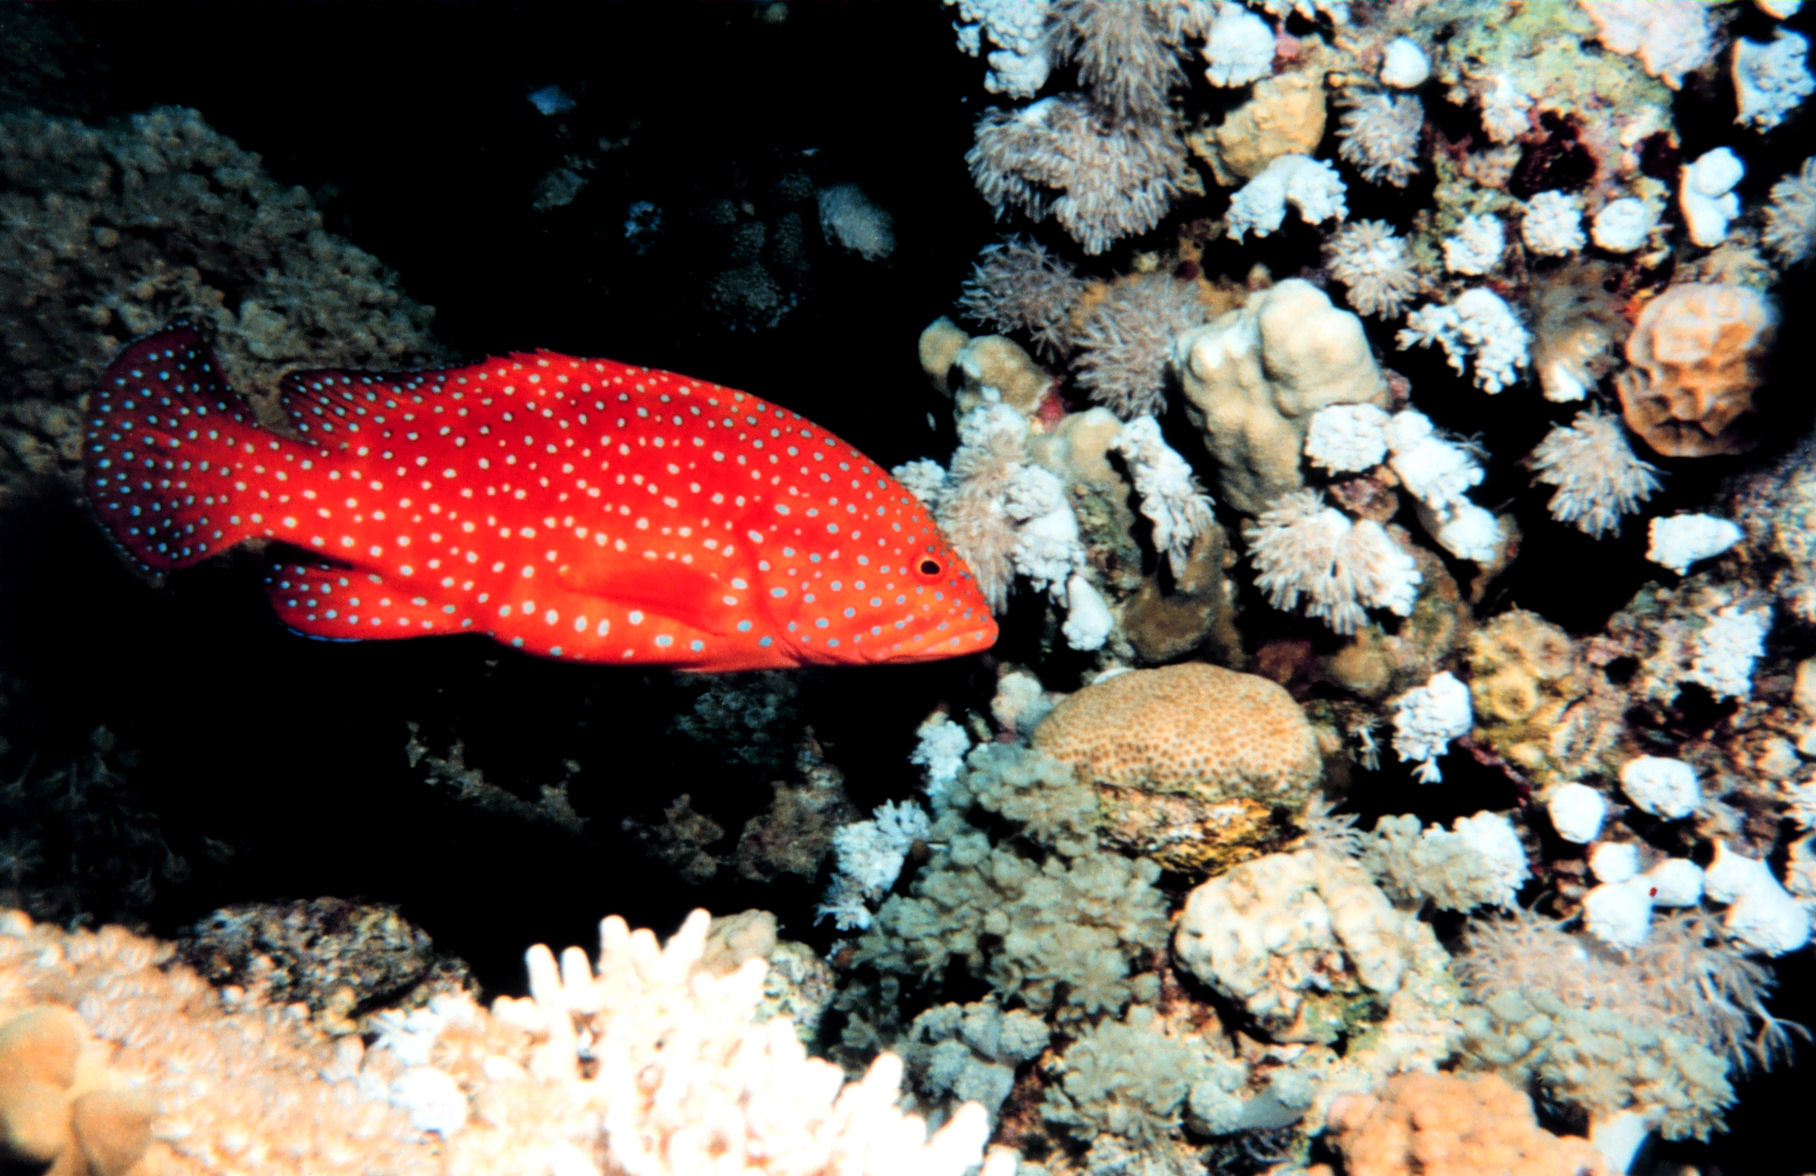 A redspotted grouper among coral